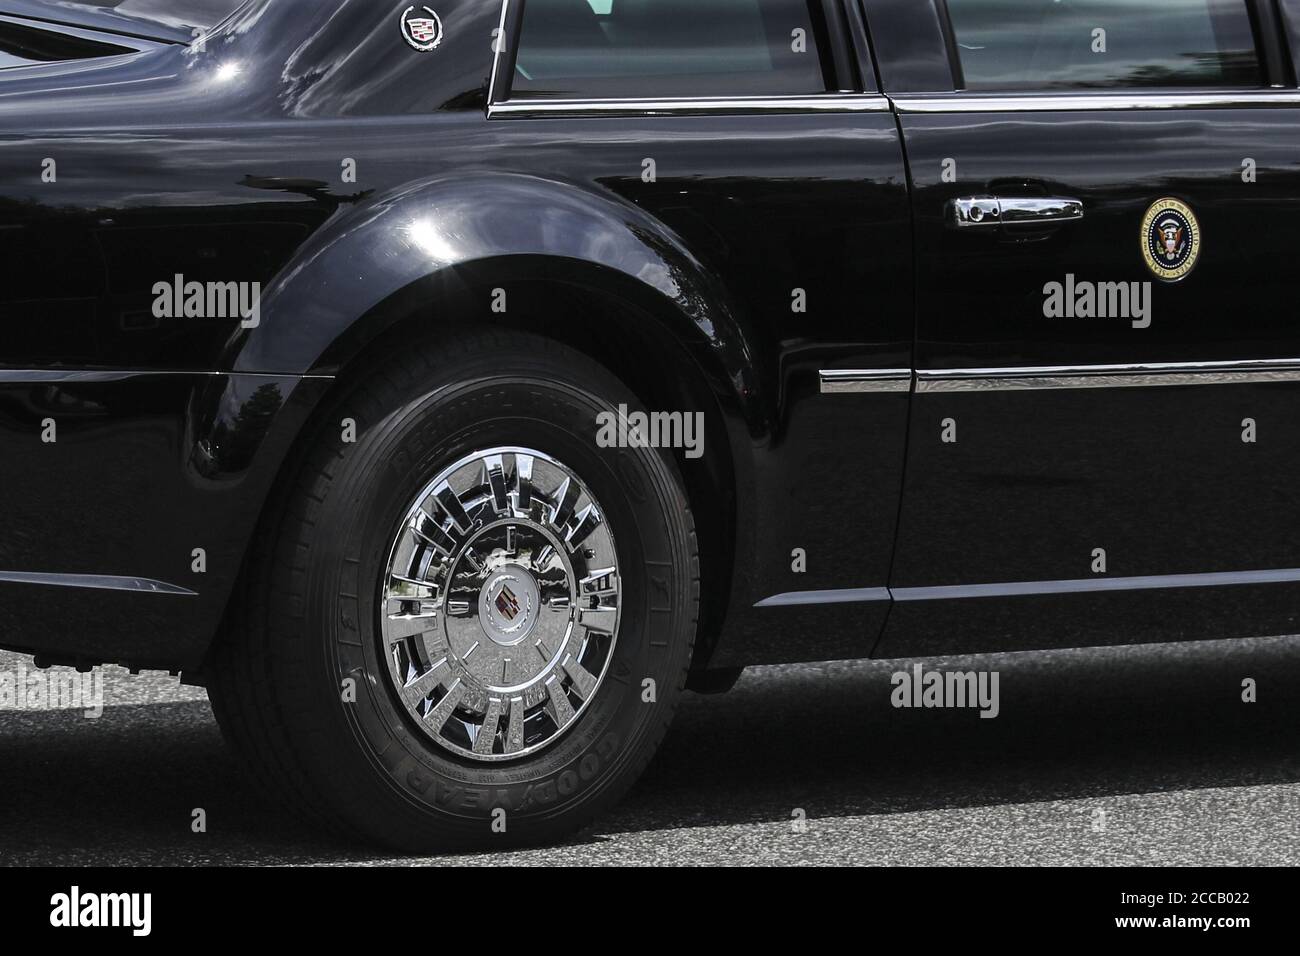 Washington, United States. 20th Aug, 2020. President Donald Trump rides the Presidential limousine known as 'the beast' that uses specially-made Goodyear tires, at Joint Base Andrews, Maryland on Thursday, August 20, 2020. President Trump on Wednesday urged consumers to snub Goodyear tires after the company banned employees from wearing political attire, including pro-Trump hats. Goodyear is one of two American-owed tire manufacturers. Photo by Oliver Contreras/UPI Credit: UPI/Alamy Live News Stock Photo